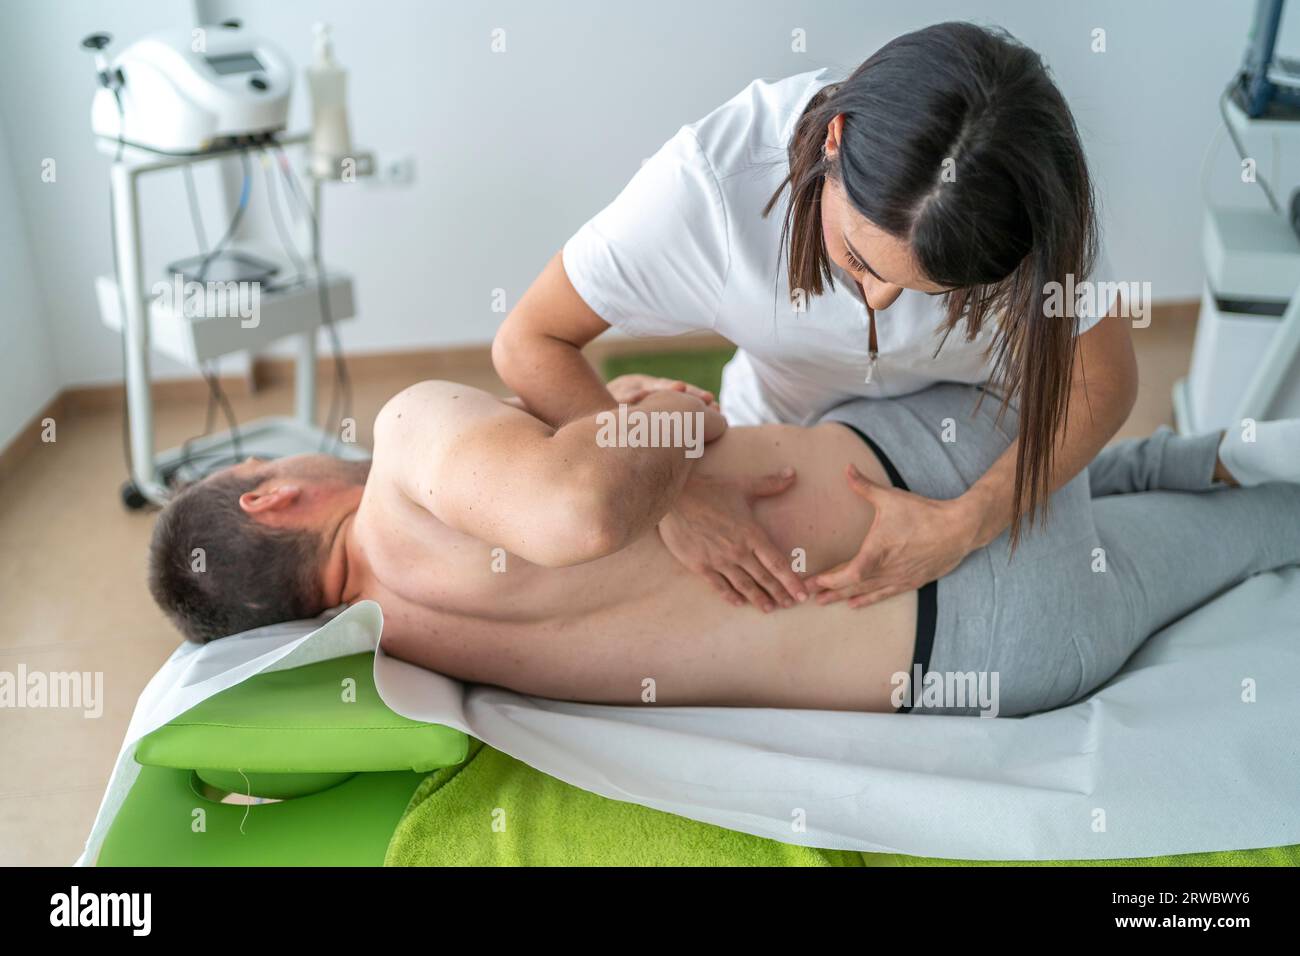 Calm young female therapist in white uniform rubbing back of male patient lying on table during massage treatment procedure in modern clinic Stock Photo